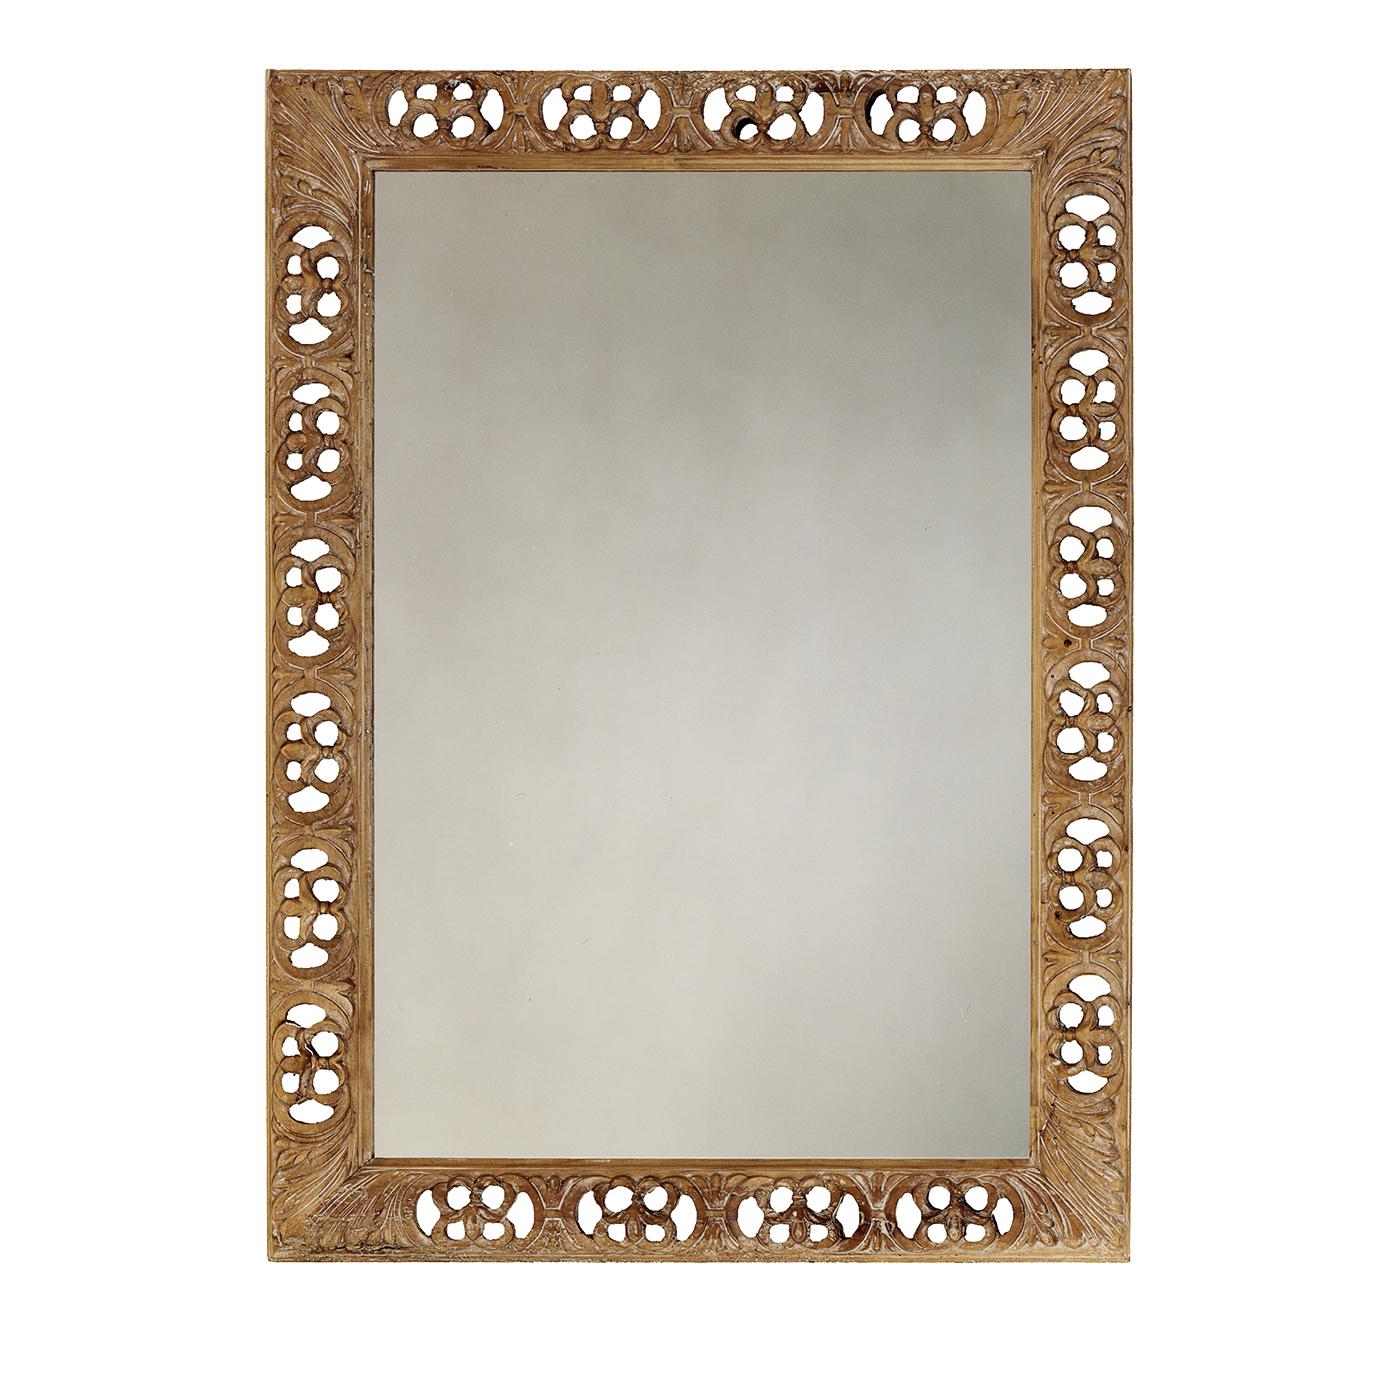 This unique mirror is a stunning example of exquisite craftsmanship. The rectangular mirror is adorned with a frame in sold wood with an openwork decoration made by hand and embellished with carved elements at the corners in the shape of